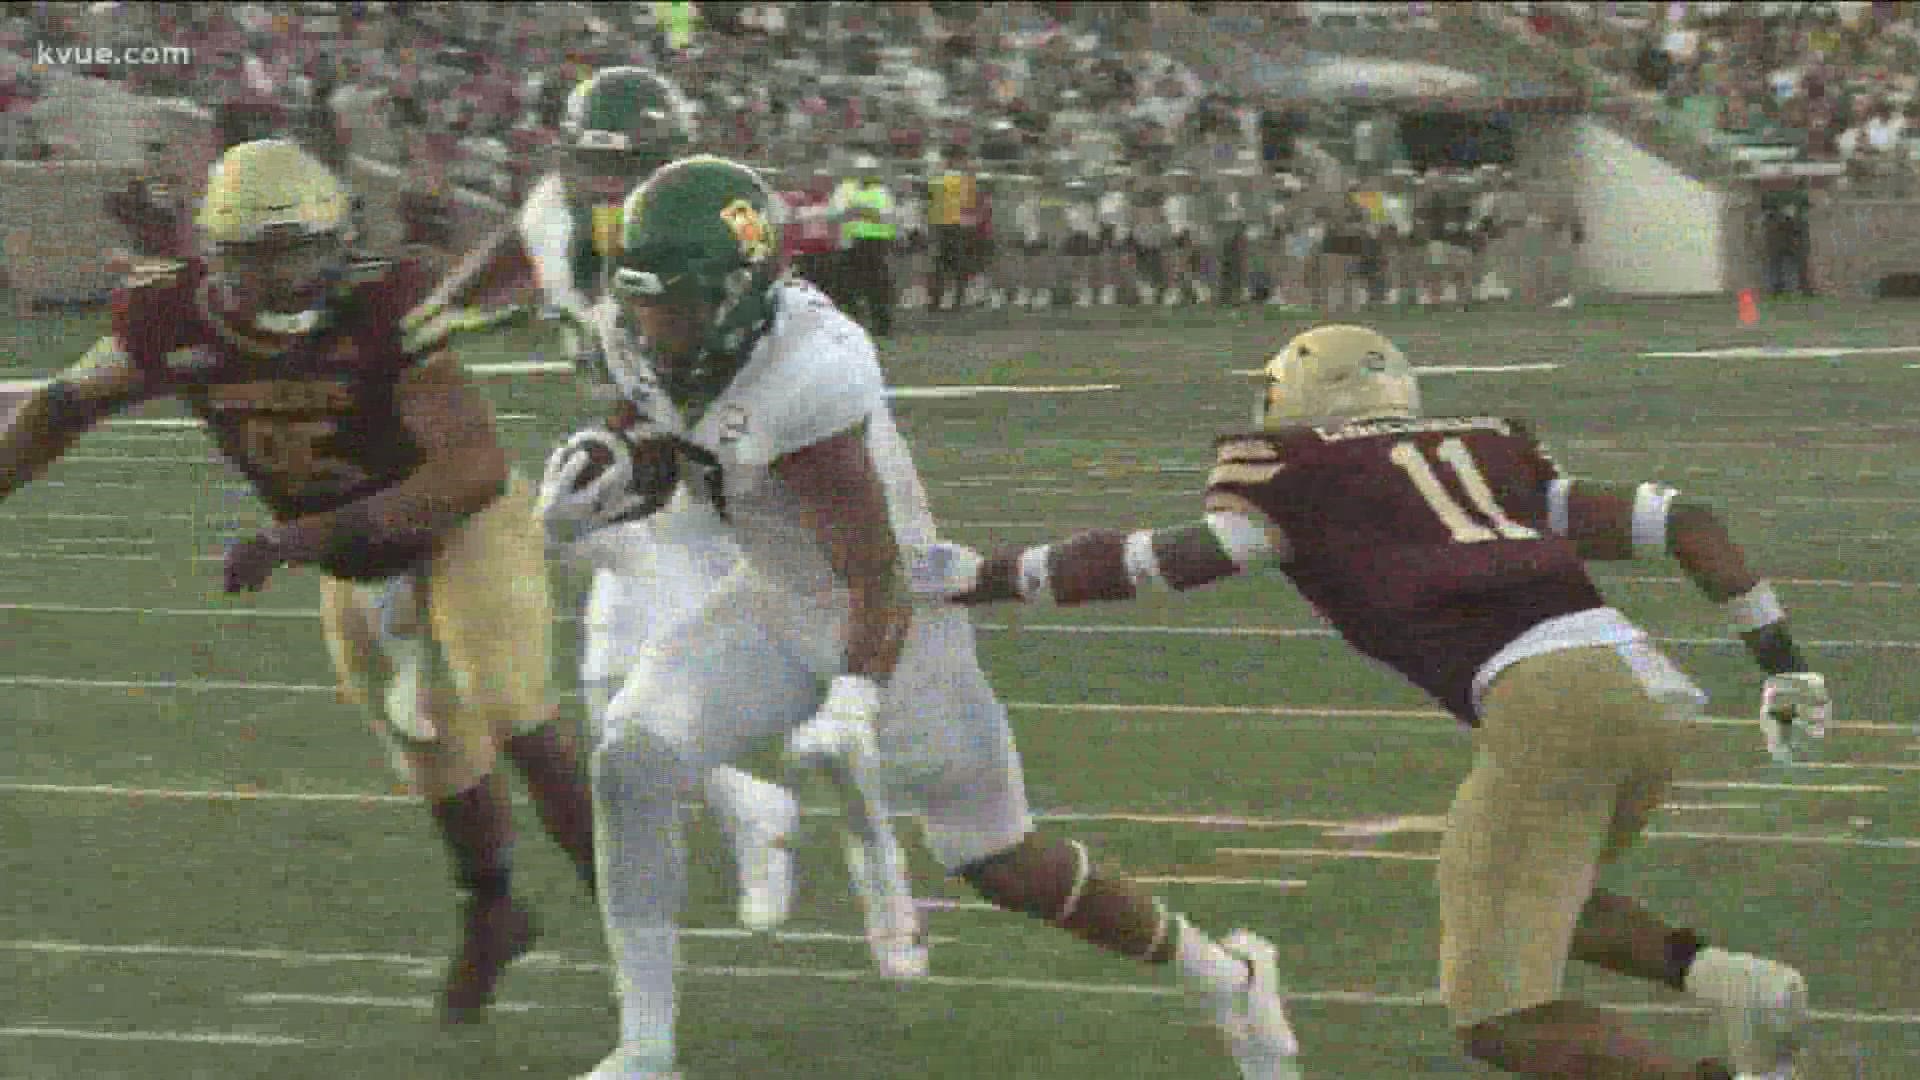 Baylor defeated Texas State, 29-20.